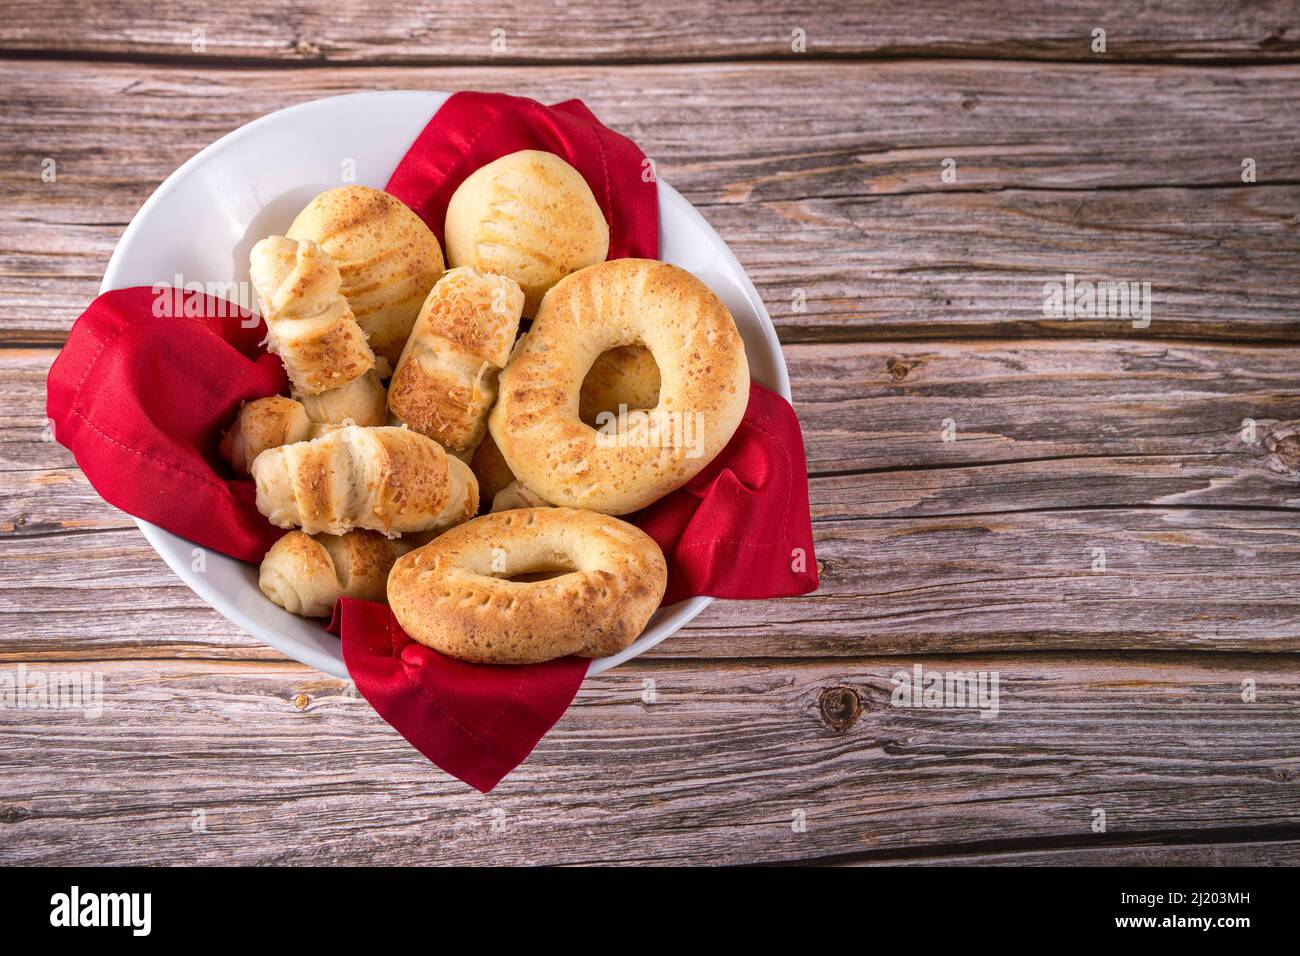 pieces of bakery, typical of Colombia, cheese stick, cheese bread and almojábana Stock Photo